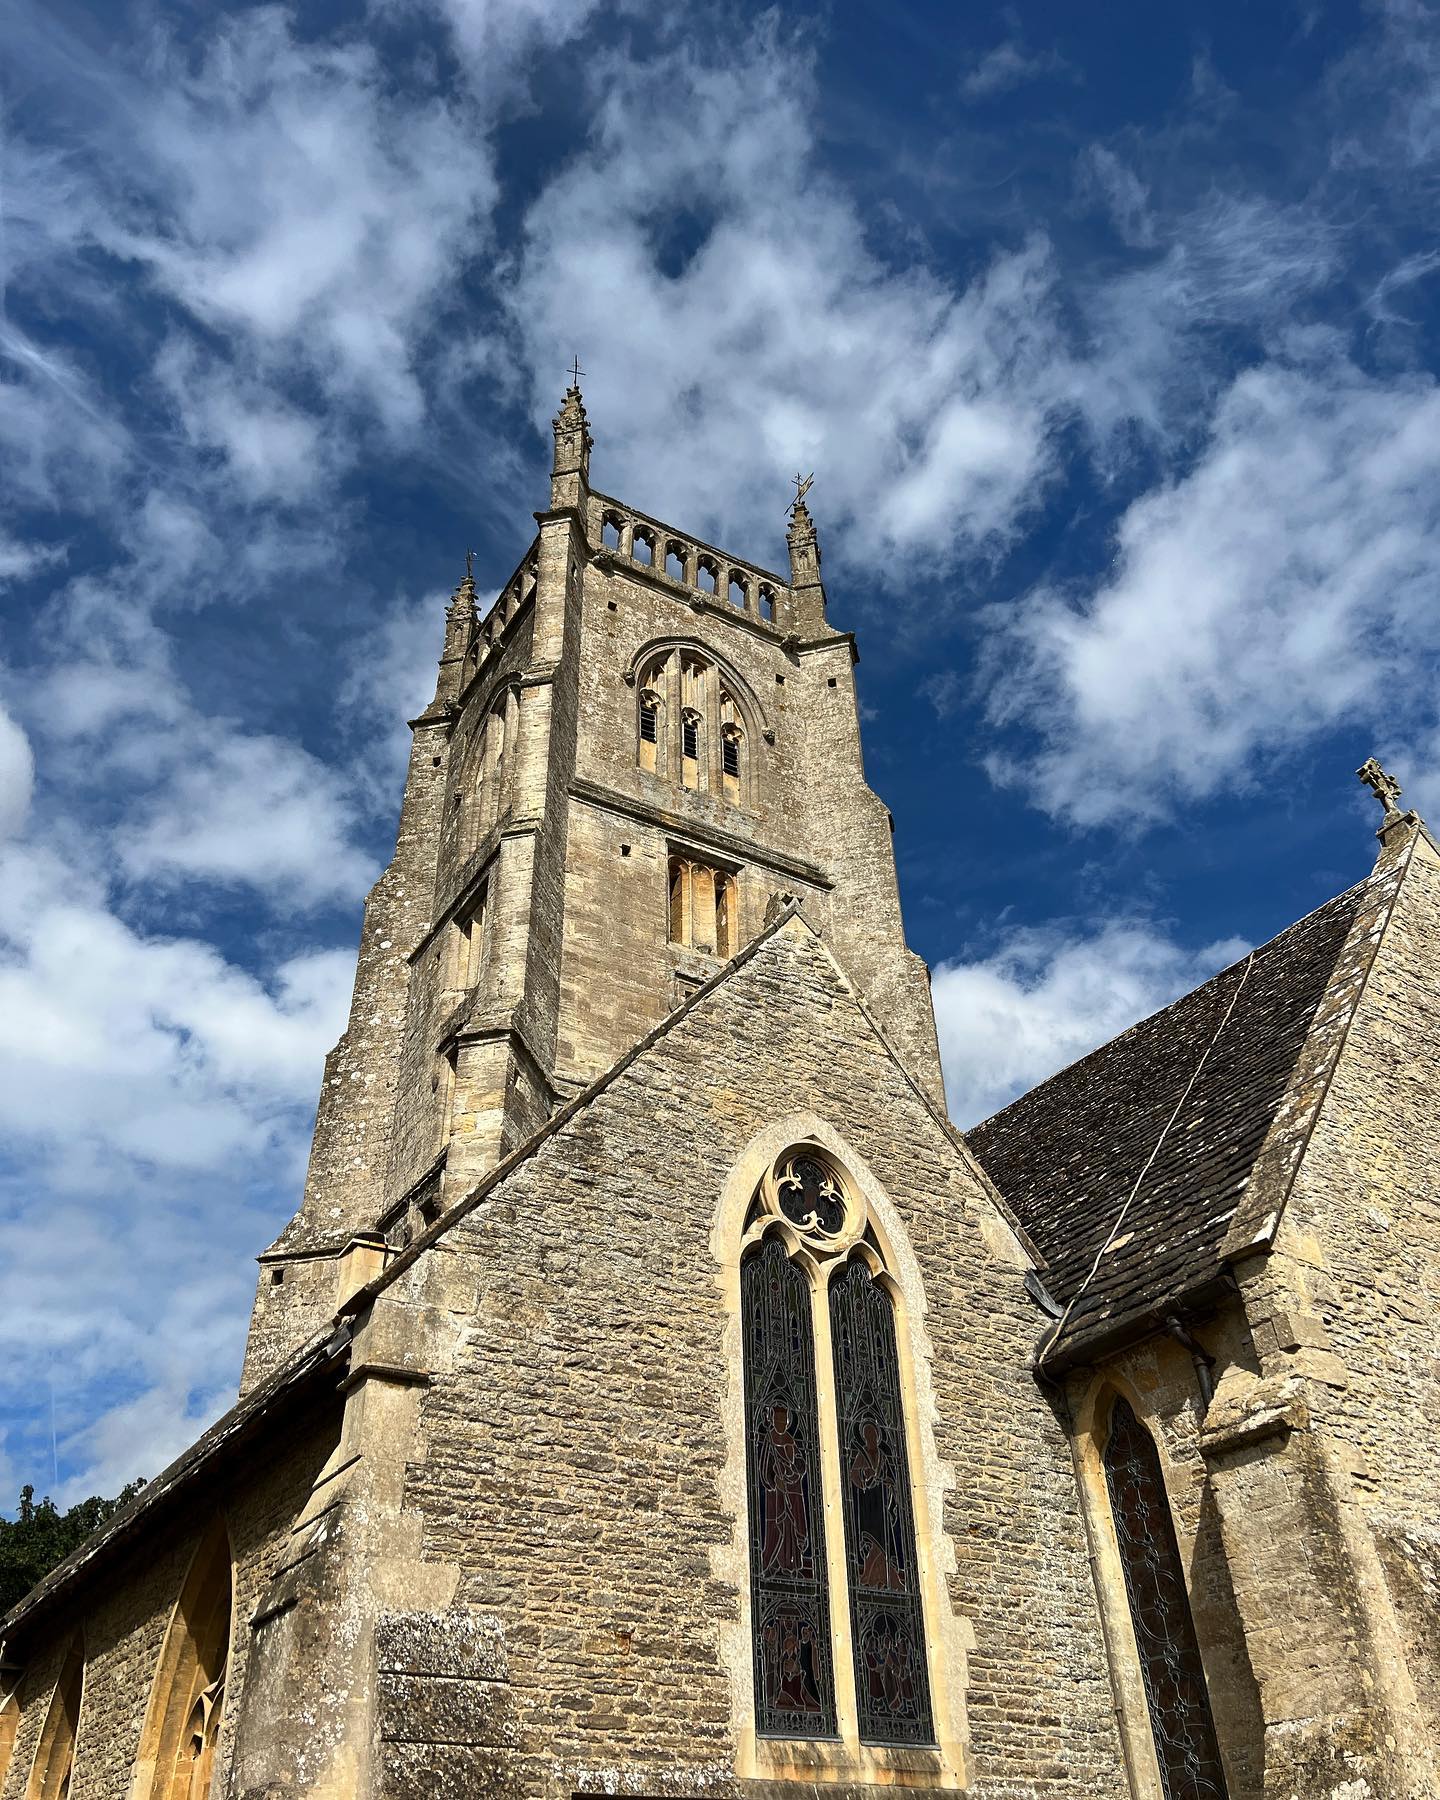 Spectacular picture of the #tower at our #quinquennialinspection at #grade1listed #church in #rural #gloucestershire 
.
#churcharchitect #cheltenhamarchitects #architectshereford #listedbuilding #buildingconservation #cotswolds #cotswoldlife #cotswoldstyle